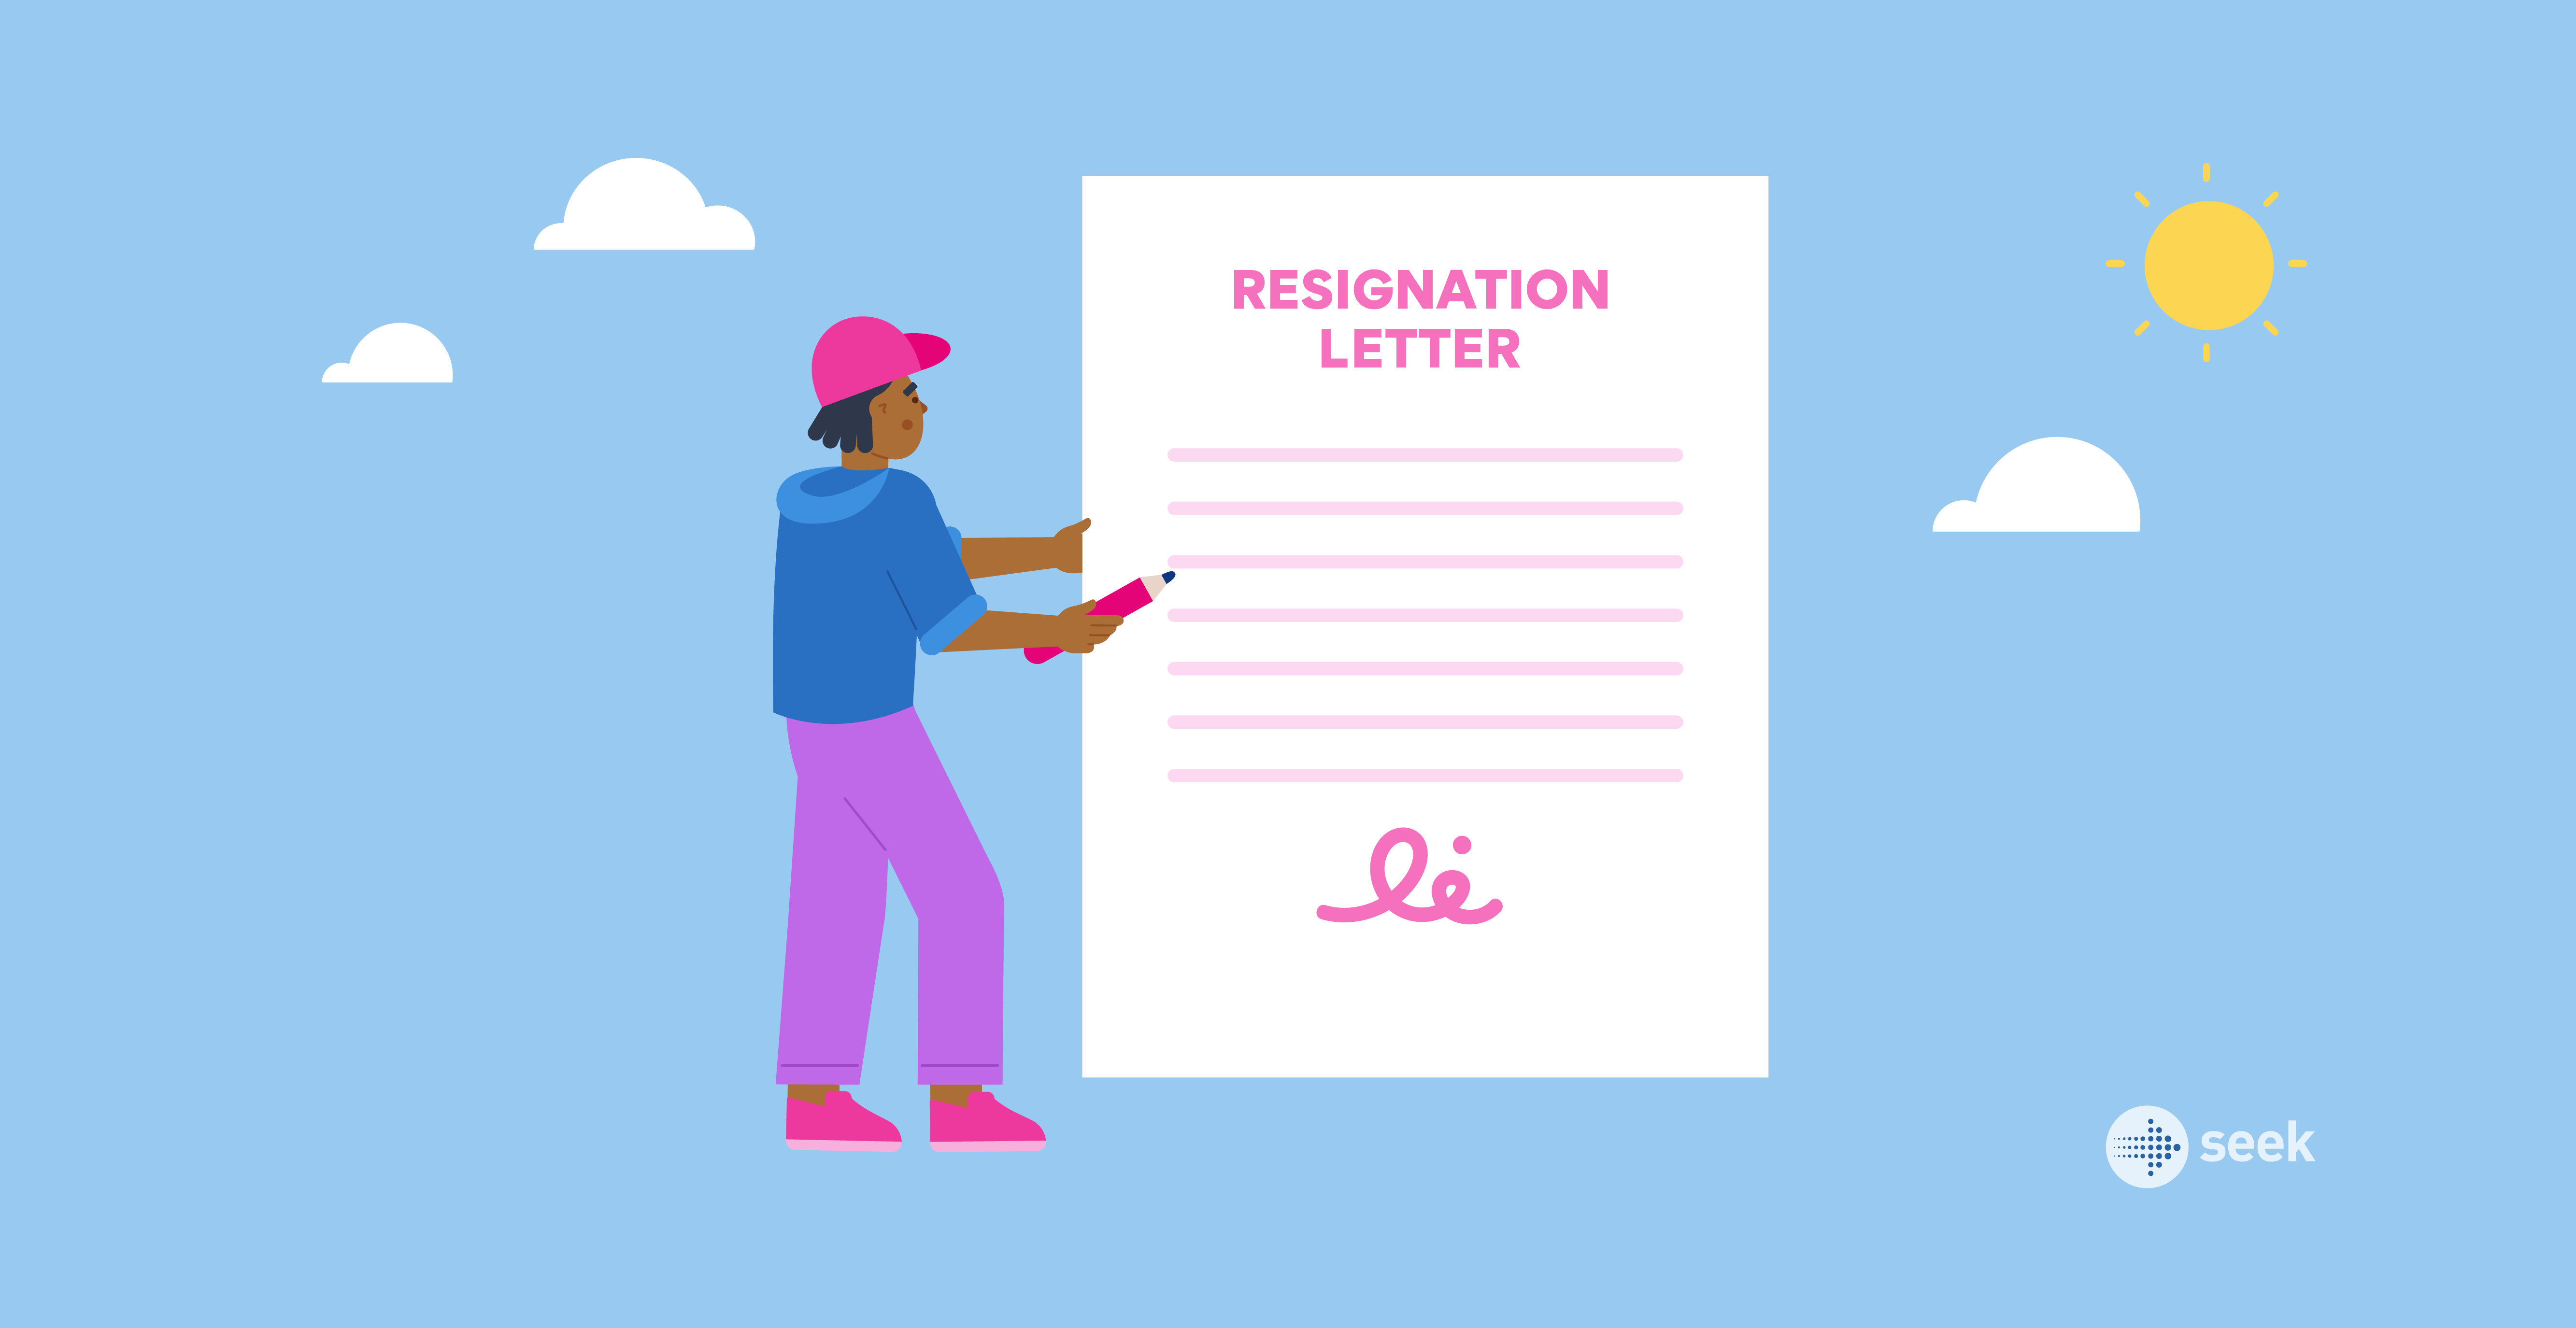 How to write a resignation letter: Tips, templates and examples